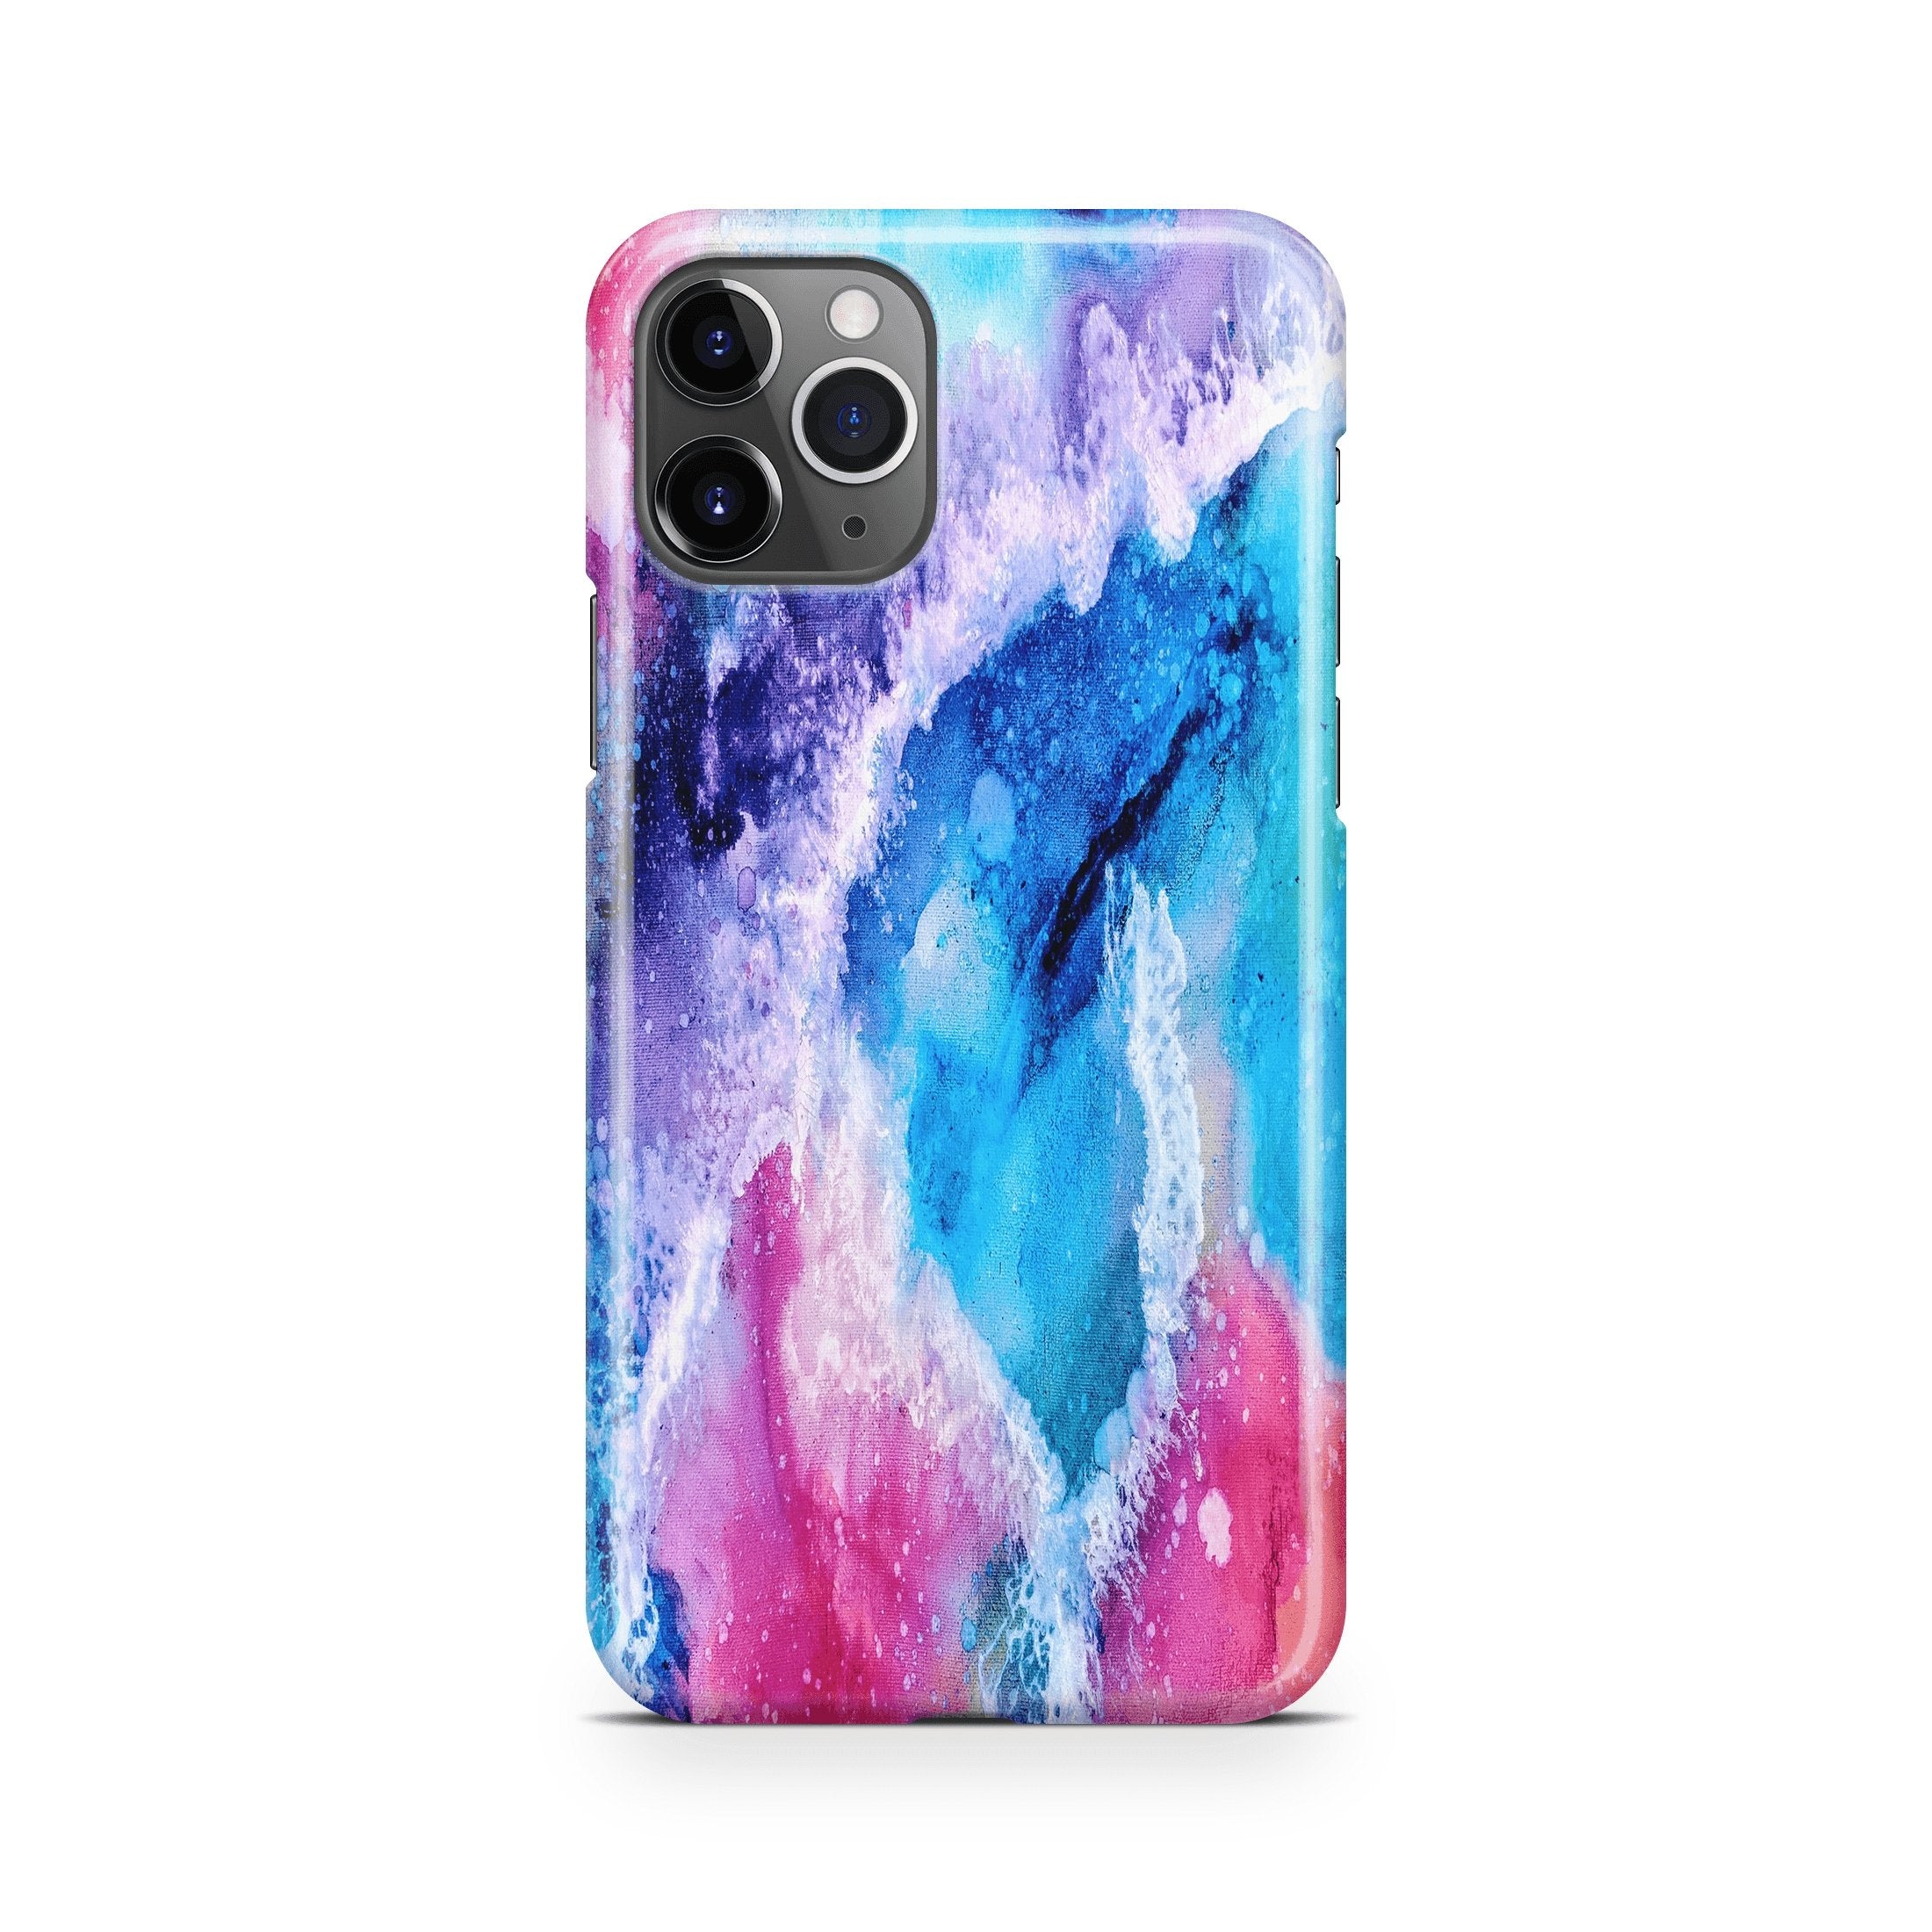 Crashing Waves - iPhone phone case designs by CaseSwagger